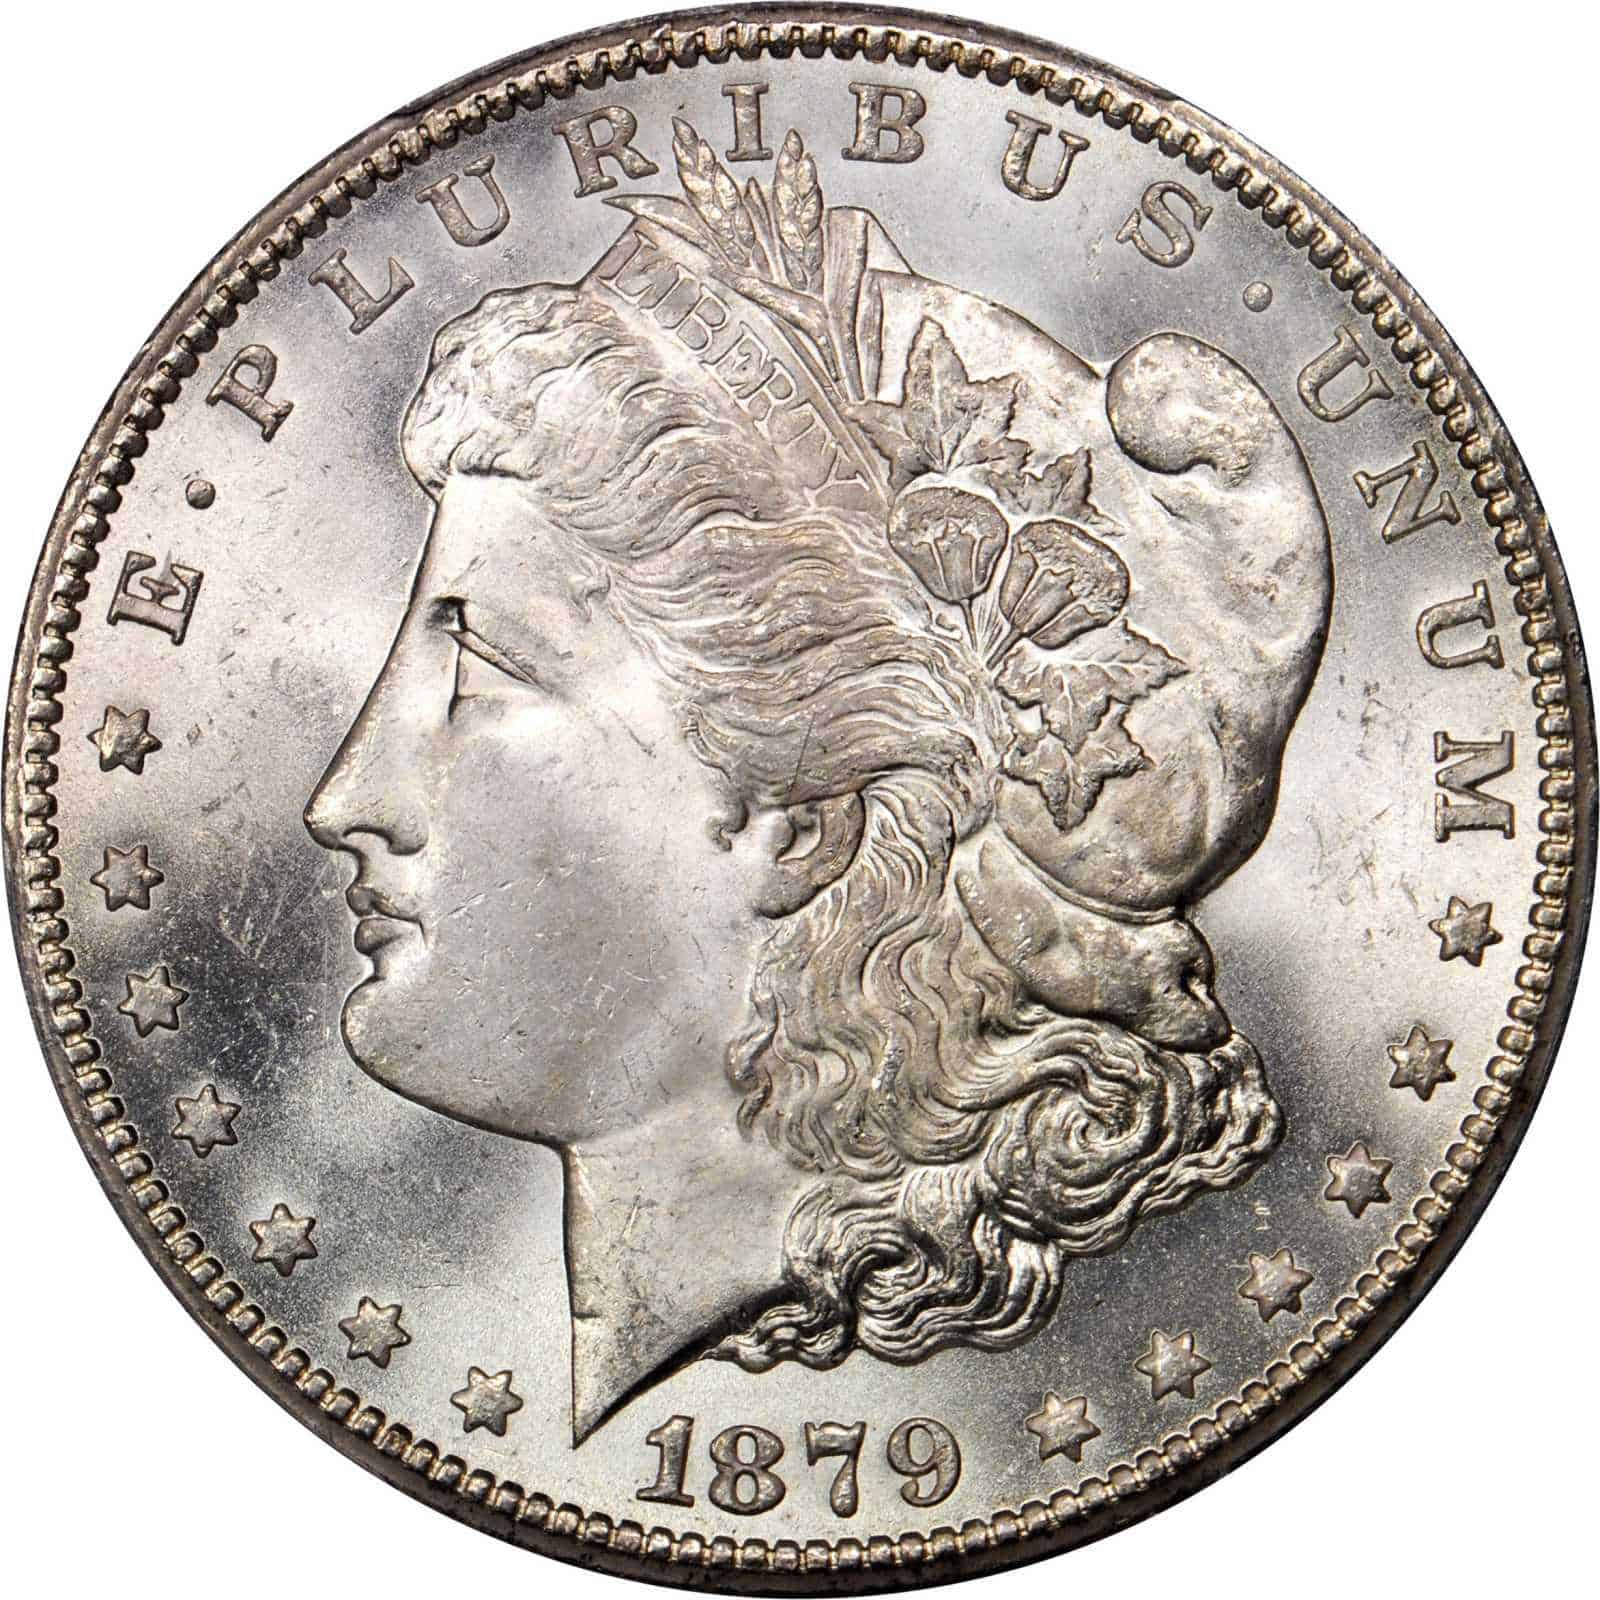 The Obverse of the 1879 Silver Dollar